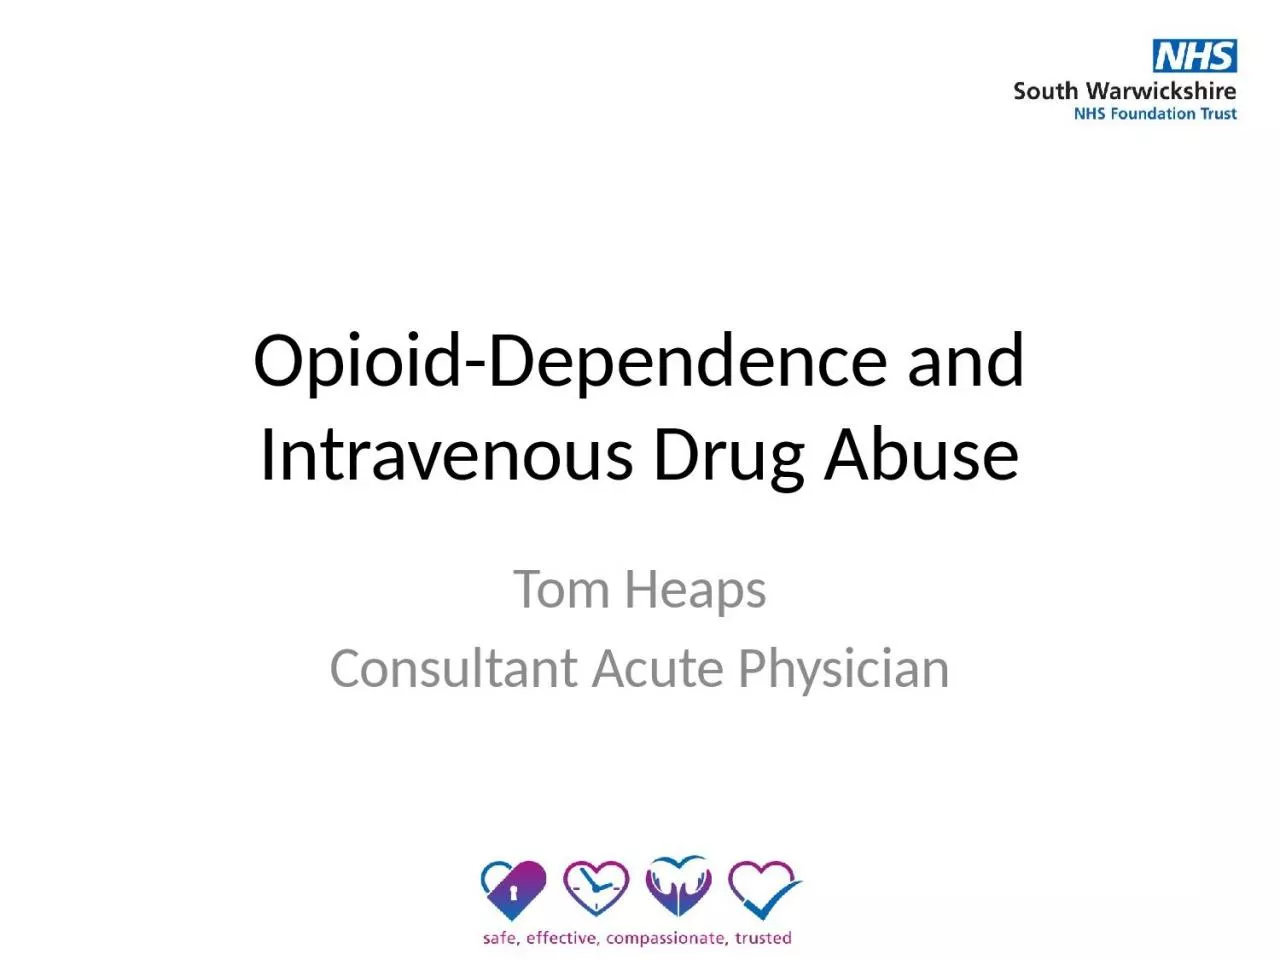 Opioid-Dependence and Intravenous Drug Abuse